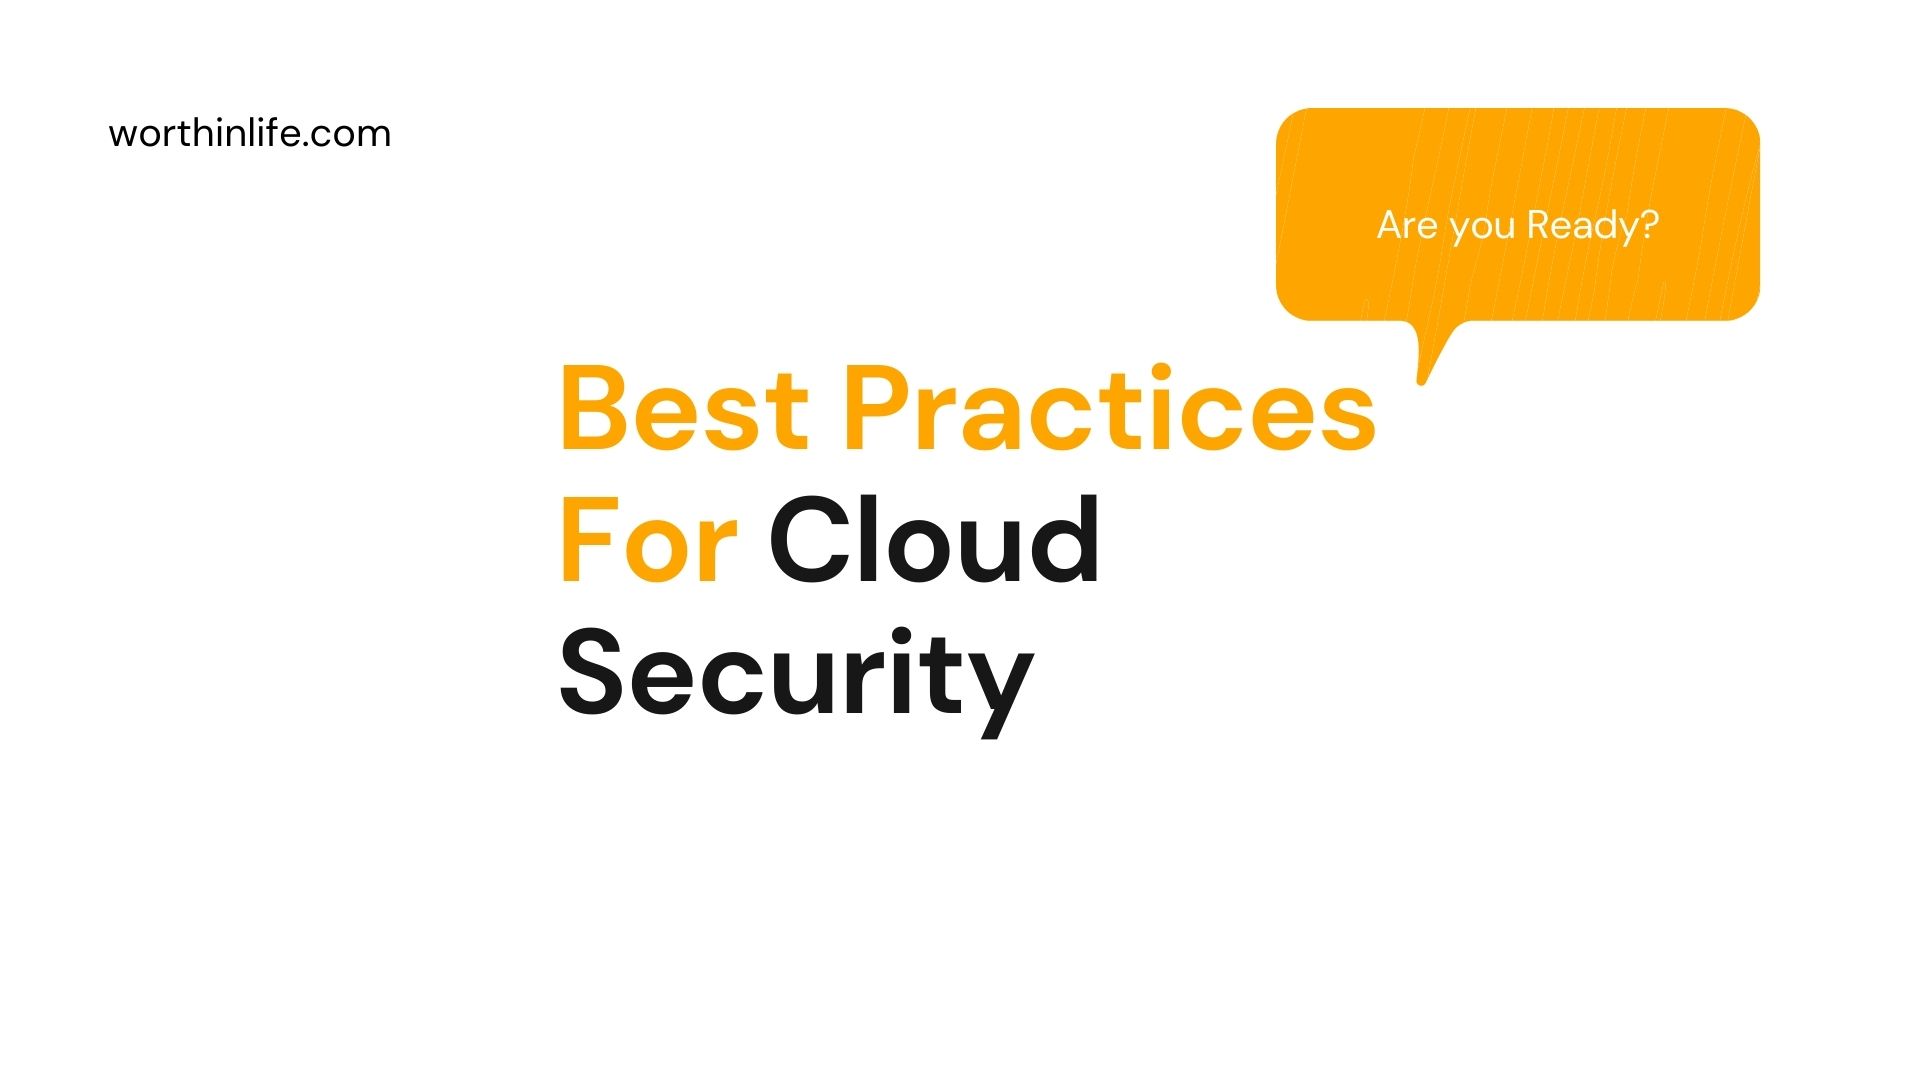 Best Practices For Cloud Security